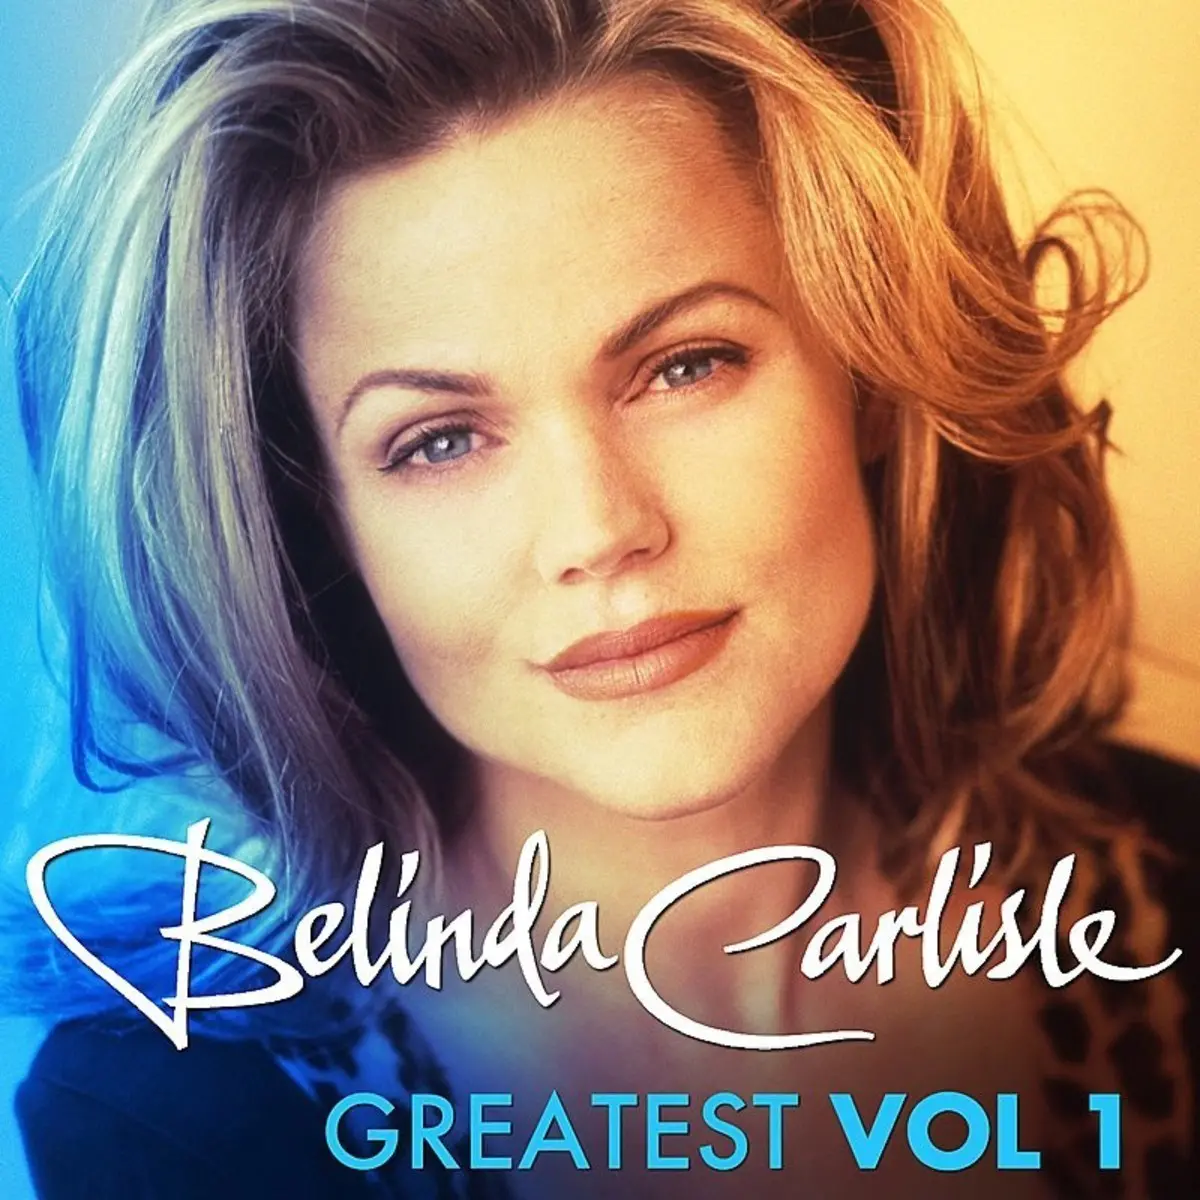 Heaven Is A Place On Earth Lyrics In English Greatest Vol 1 Belinda Carlisle Heaven Is A Place On Earth Song Lyrics In English Free Online On Gaana Com